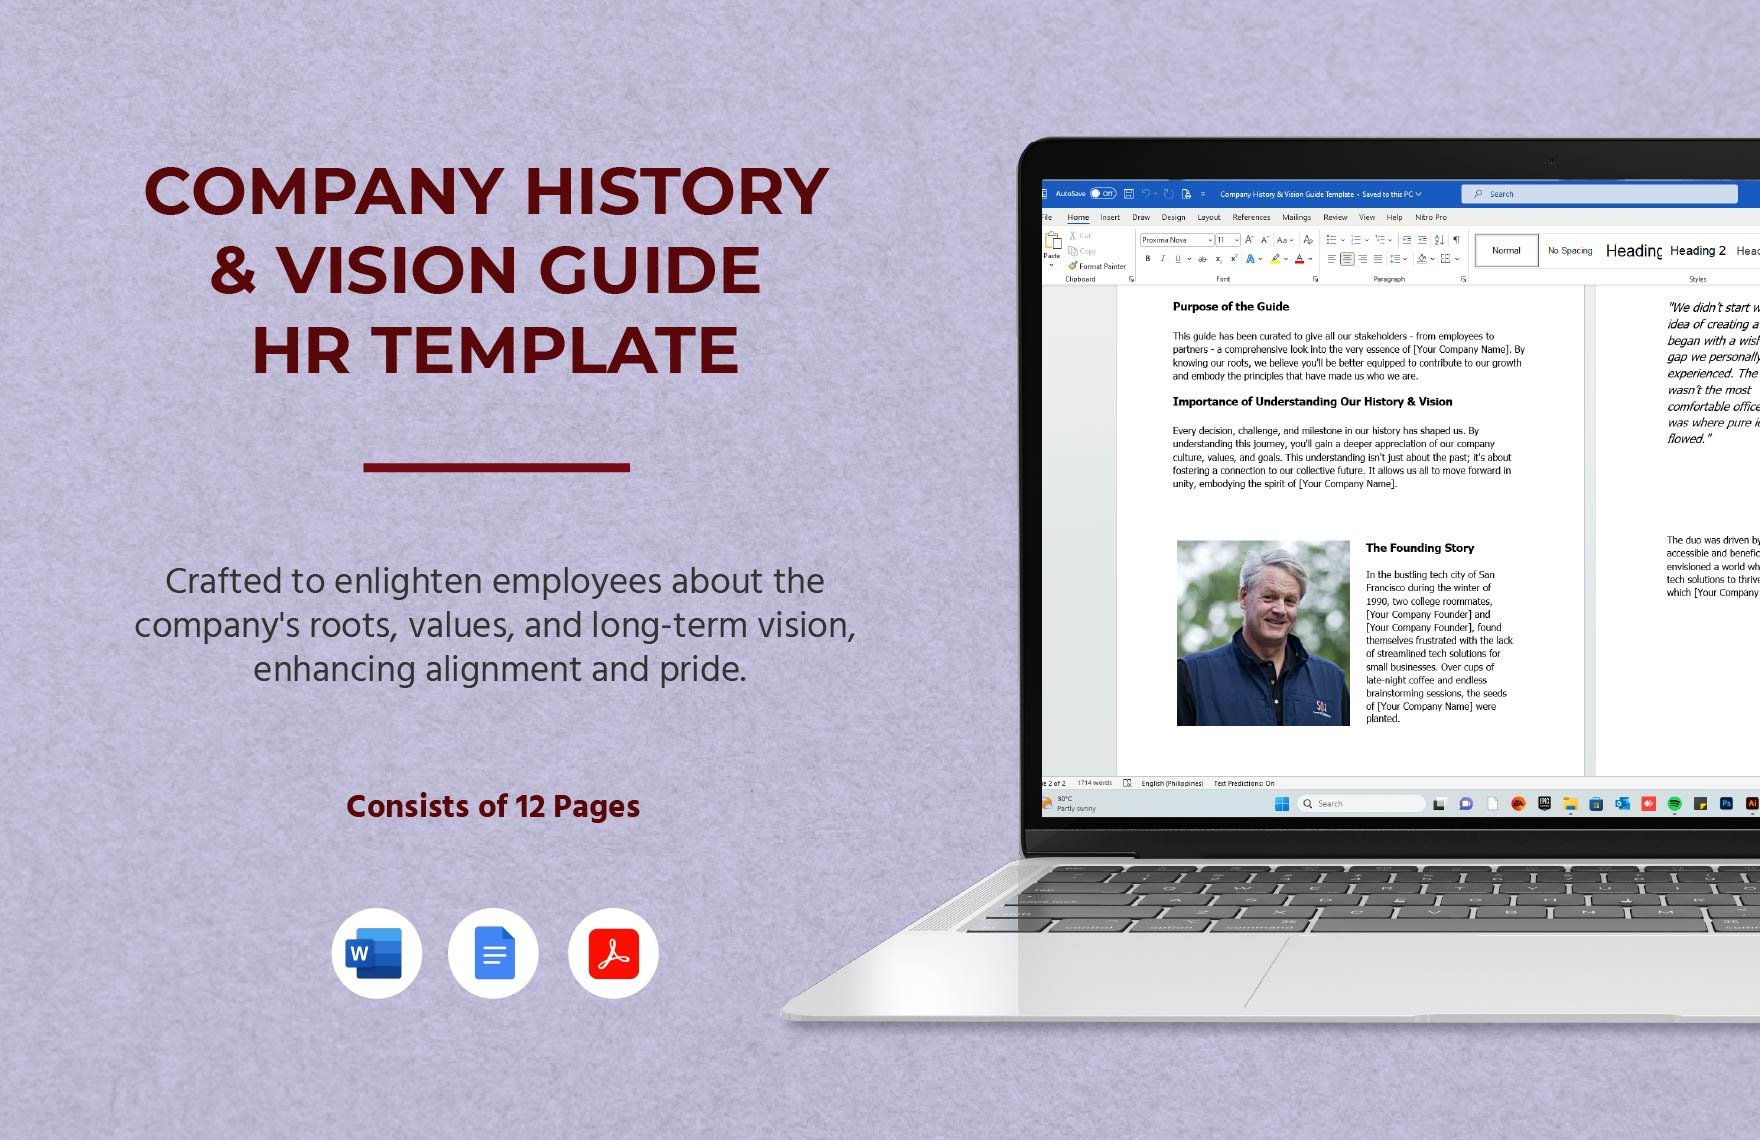 Company History & Vision Guide HR Template